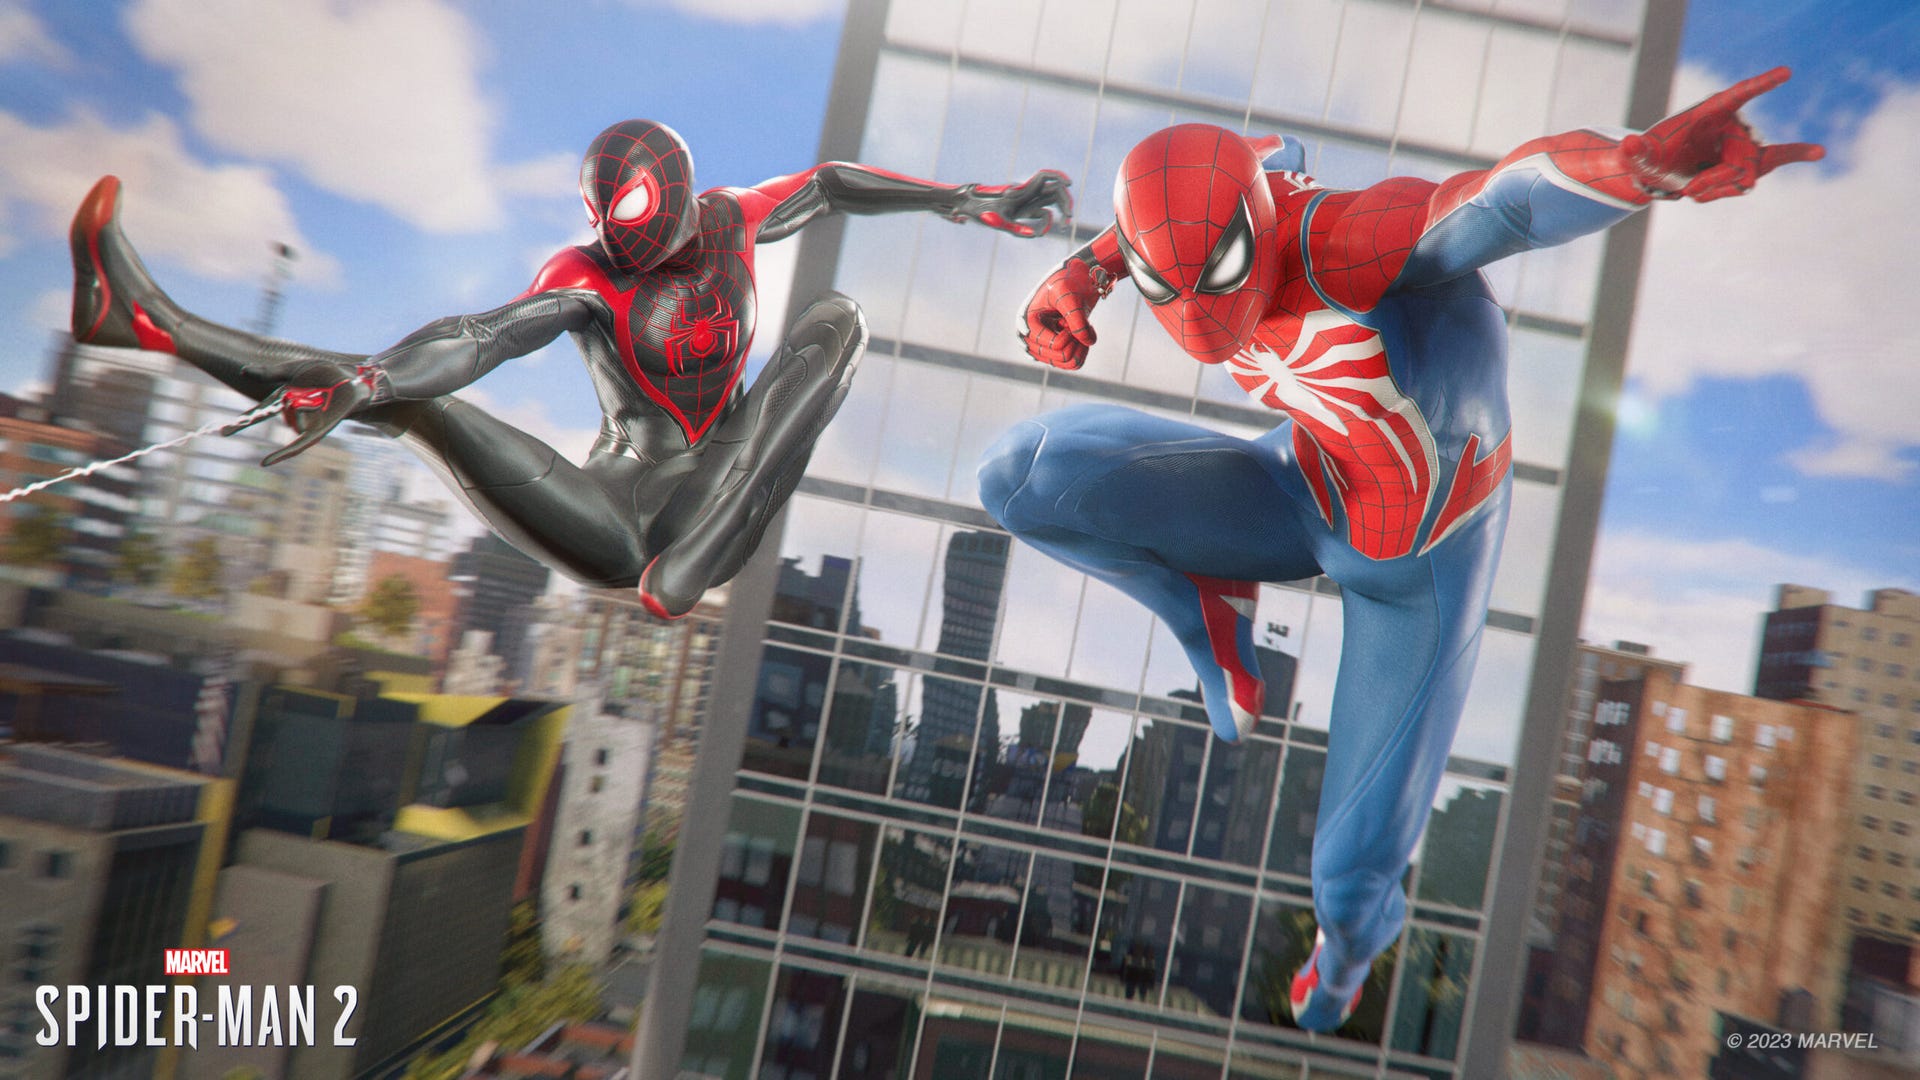 Spider-Man 2 will let you bump into the other Spider-Man